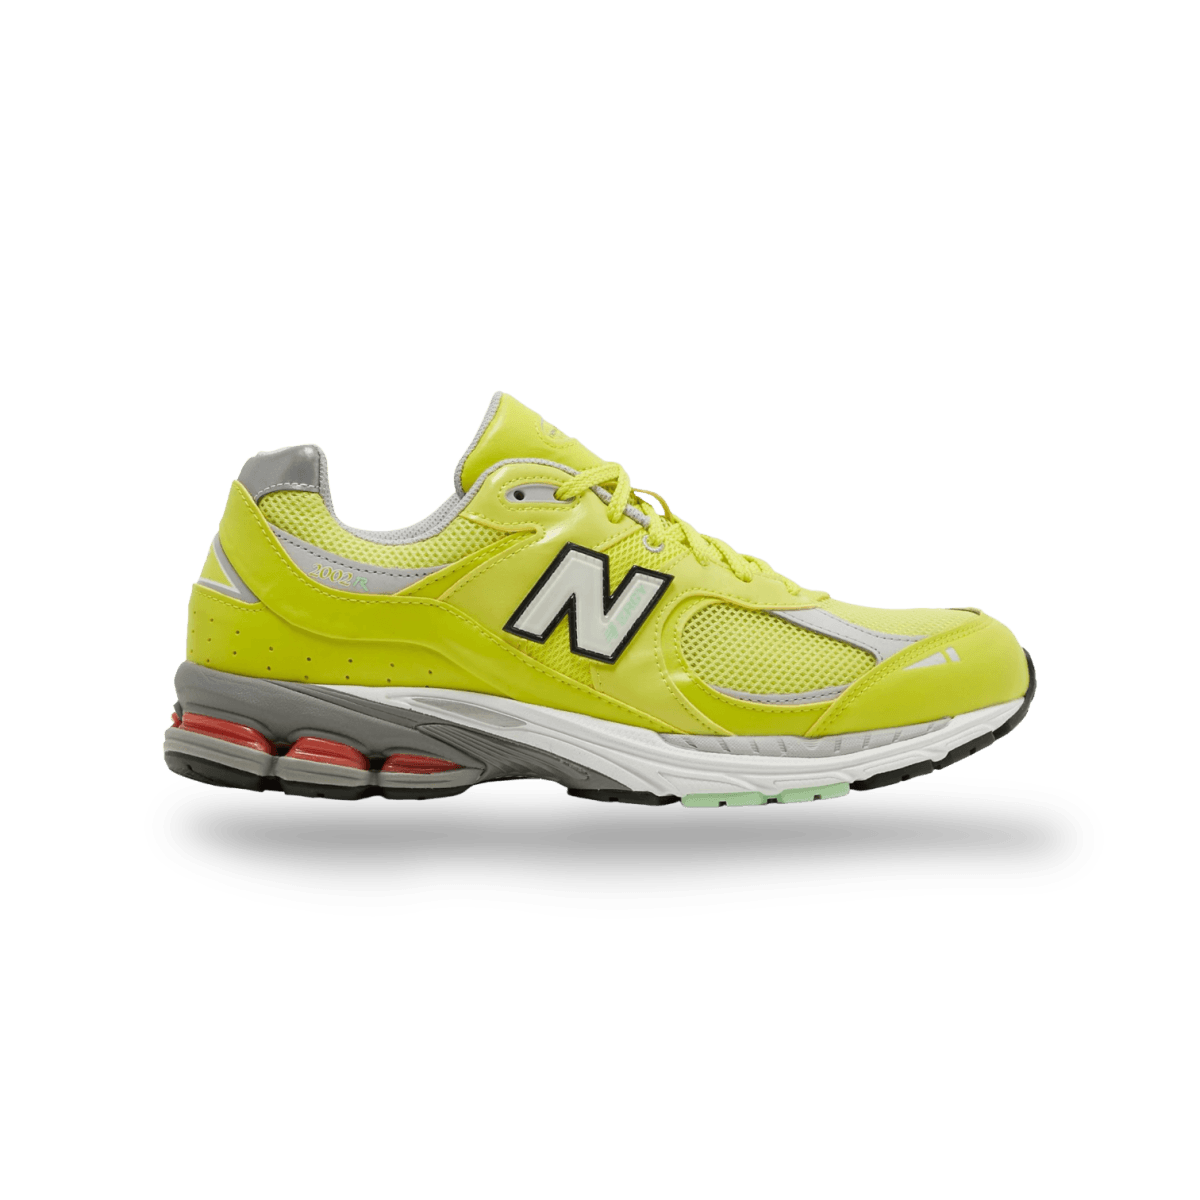 New Balance 2002R 'Sulpher Yellow' (No Box) - Low Sneaker - Jawns on Fire Sneakers & Streetwear